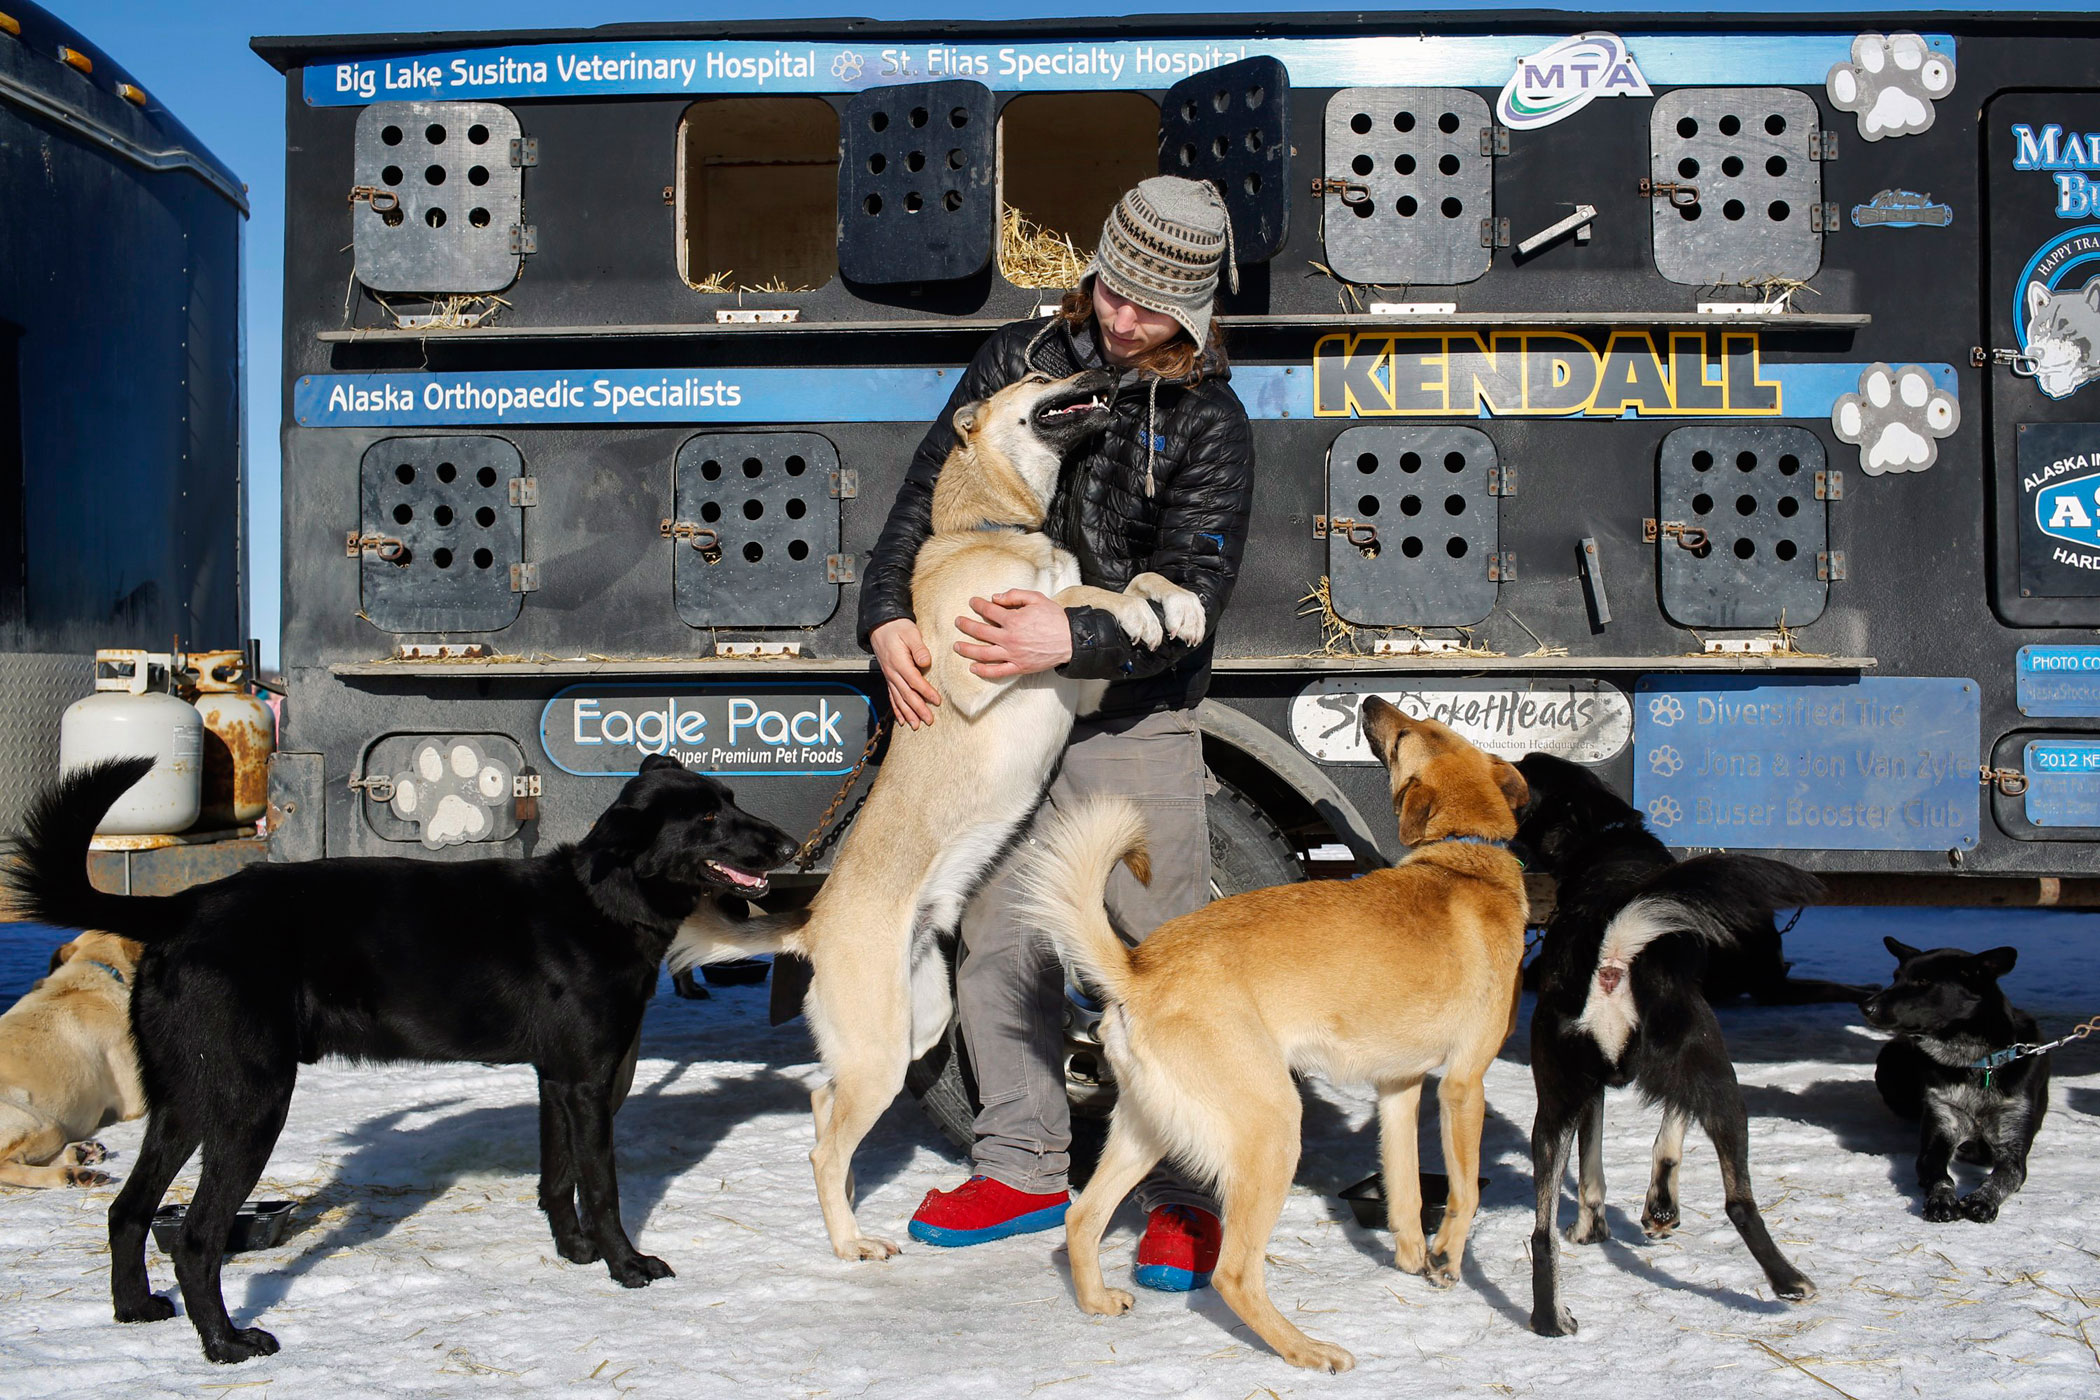 Champion musher Martin Buser's son, Rohn, greets dogs from his dad's team before the restart of the Iditarod Trail Sled Dog Race in Willow, Alaska on March 6.